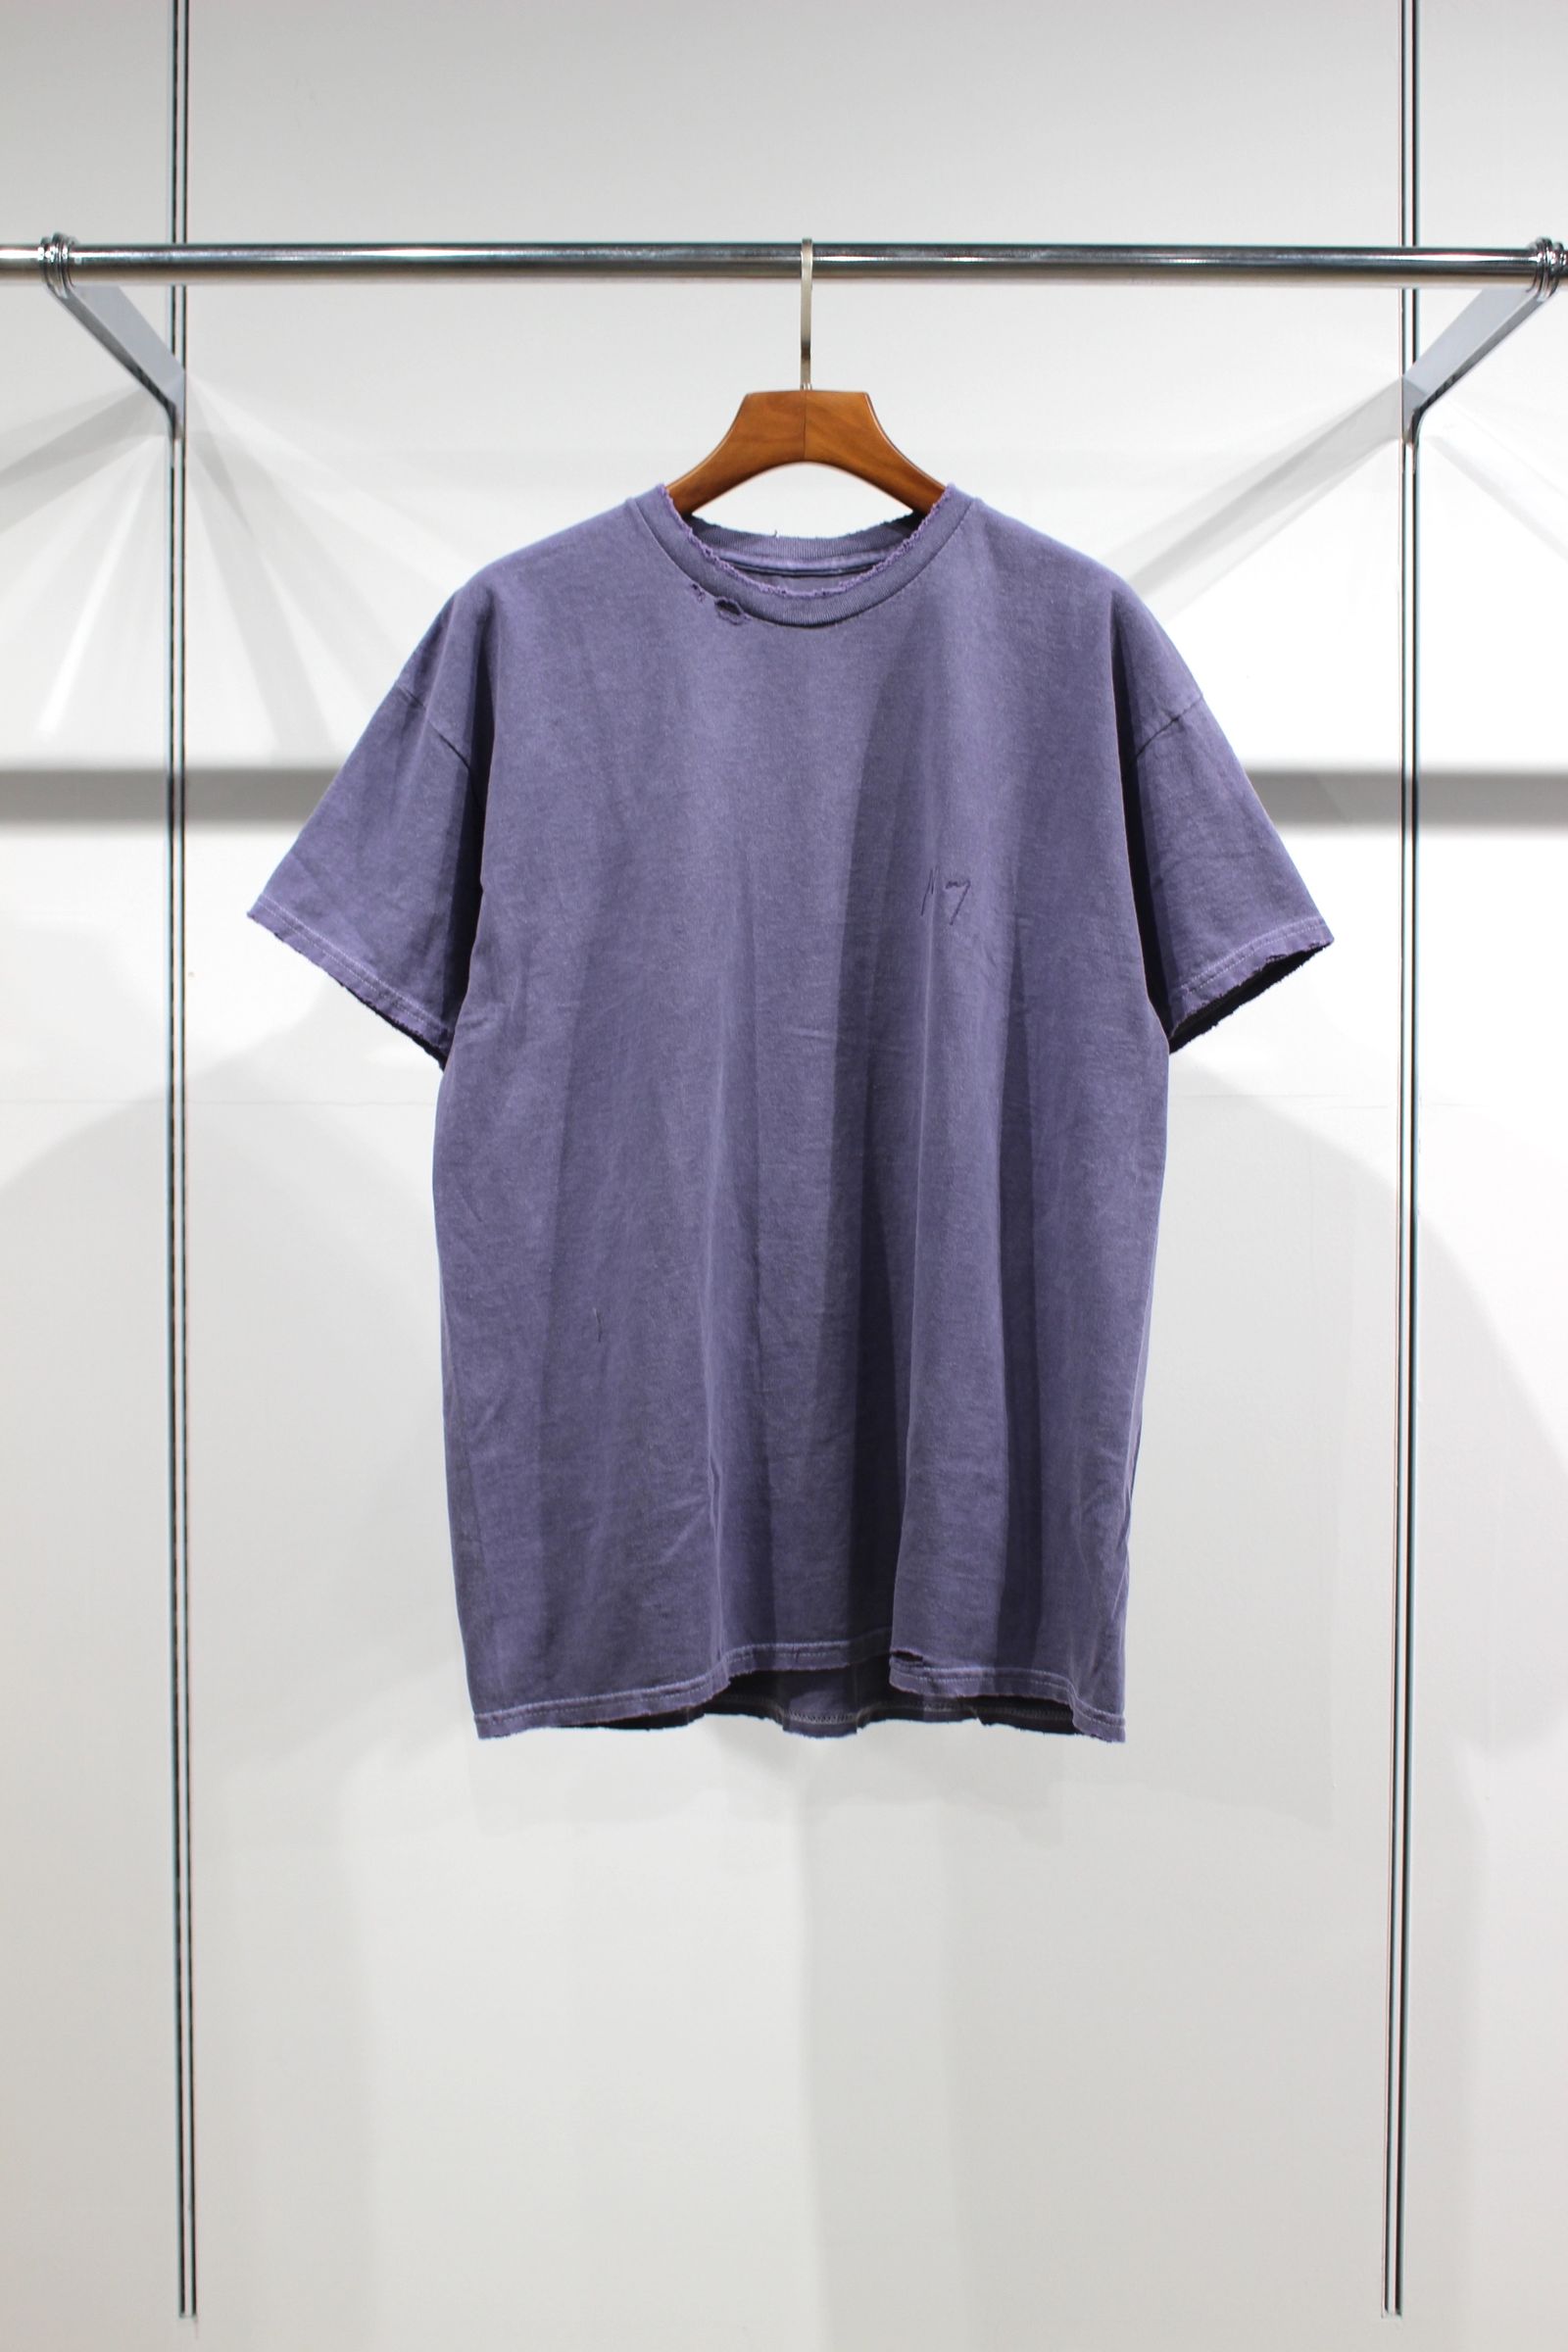 ANCELLM / アンセルム  EMBROIDERY DYED T-SHIRT